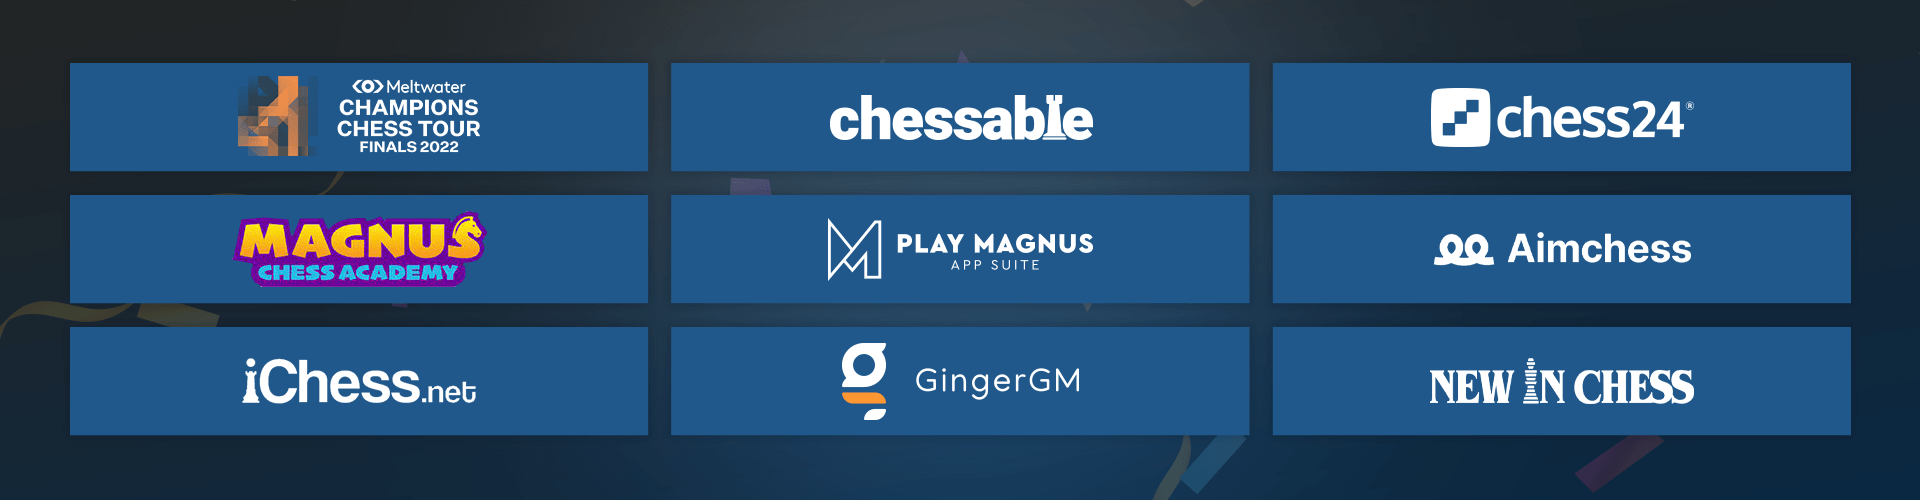 Chess.com Makes Offer To Play Magnus Group : r/chess